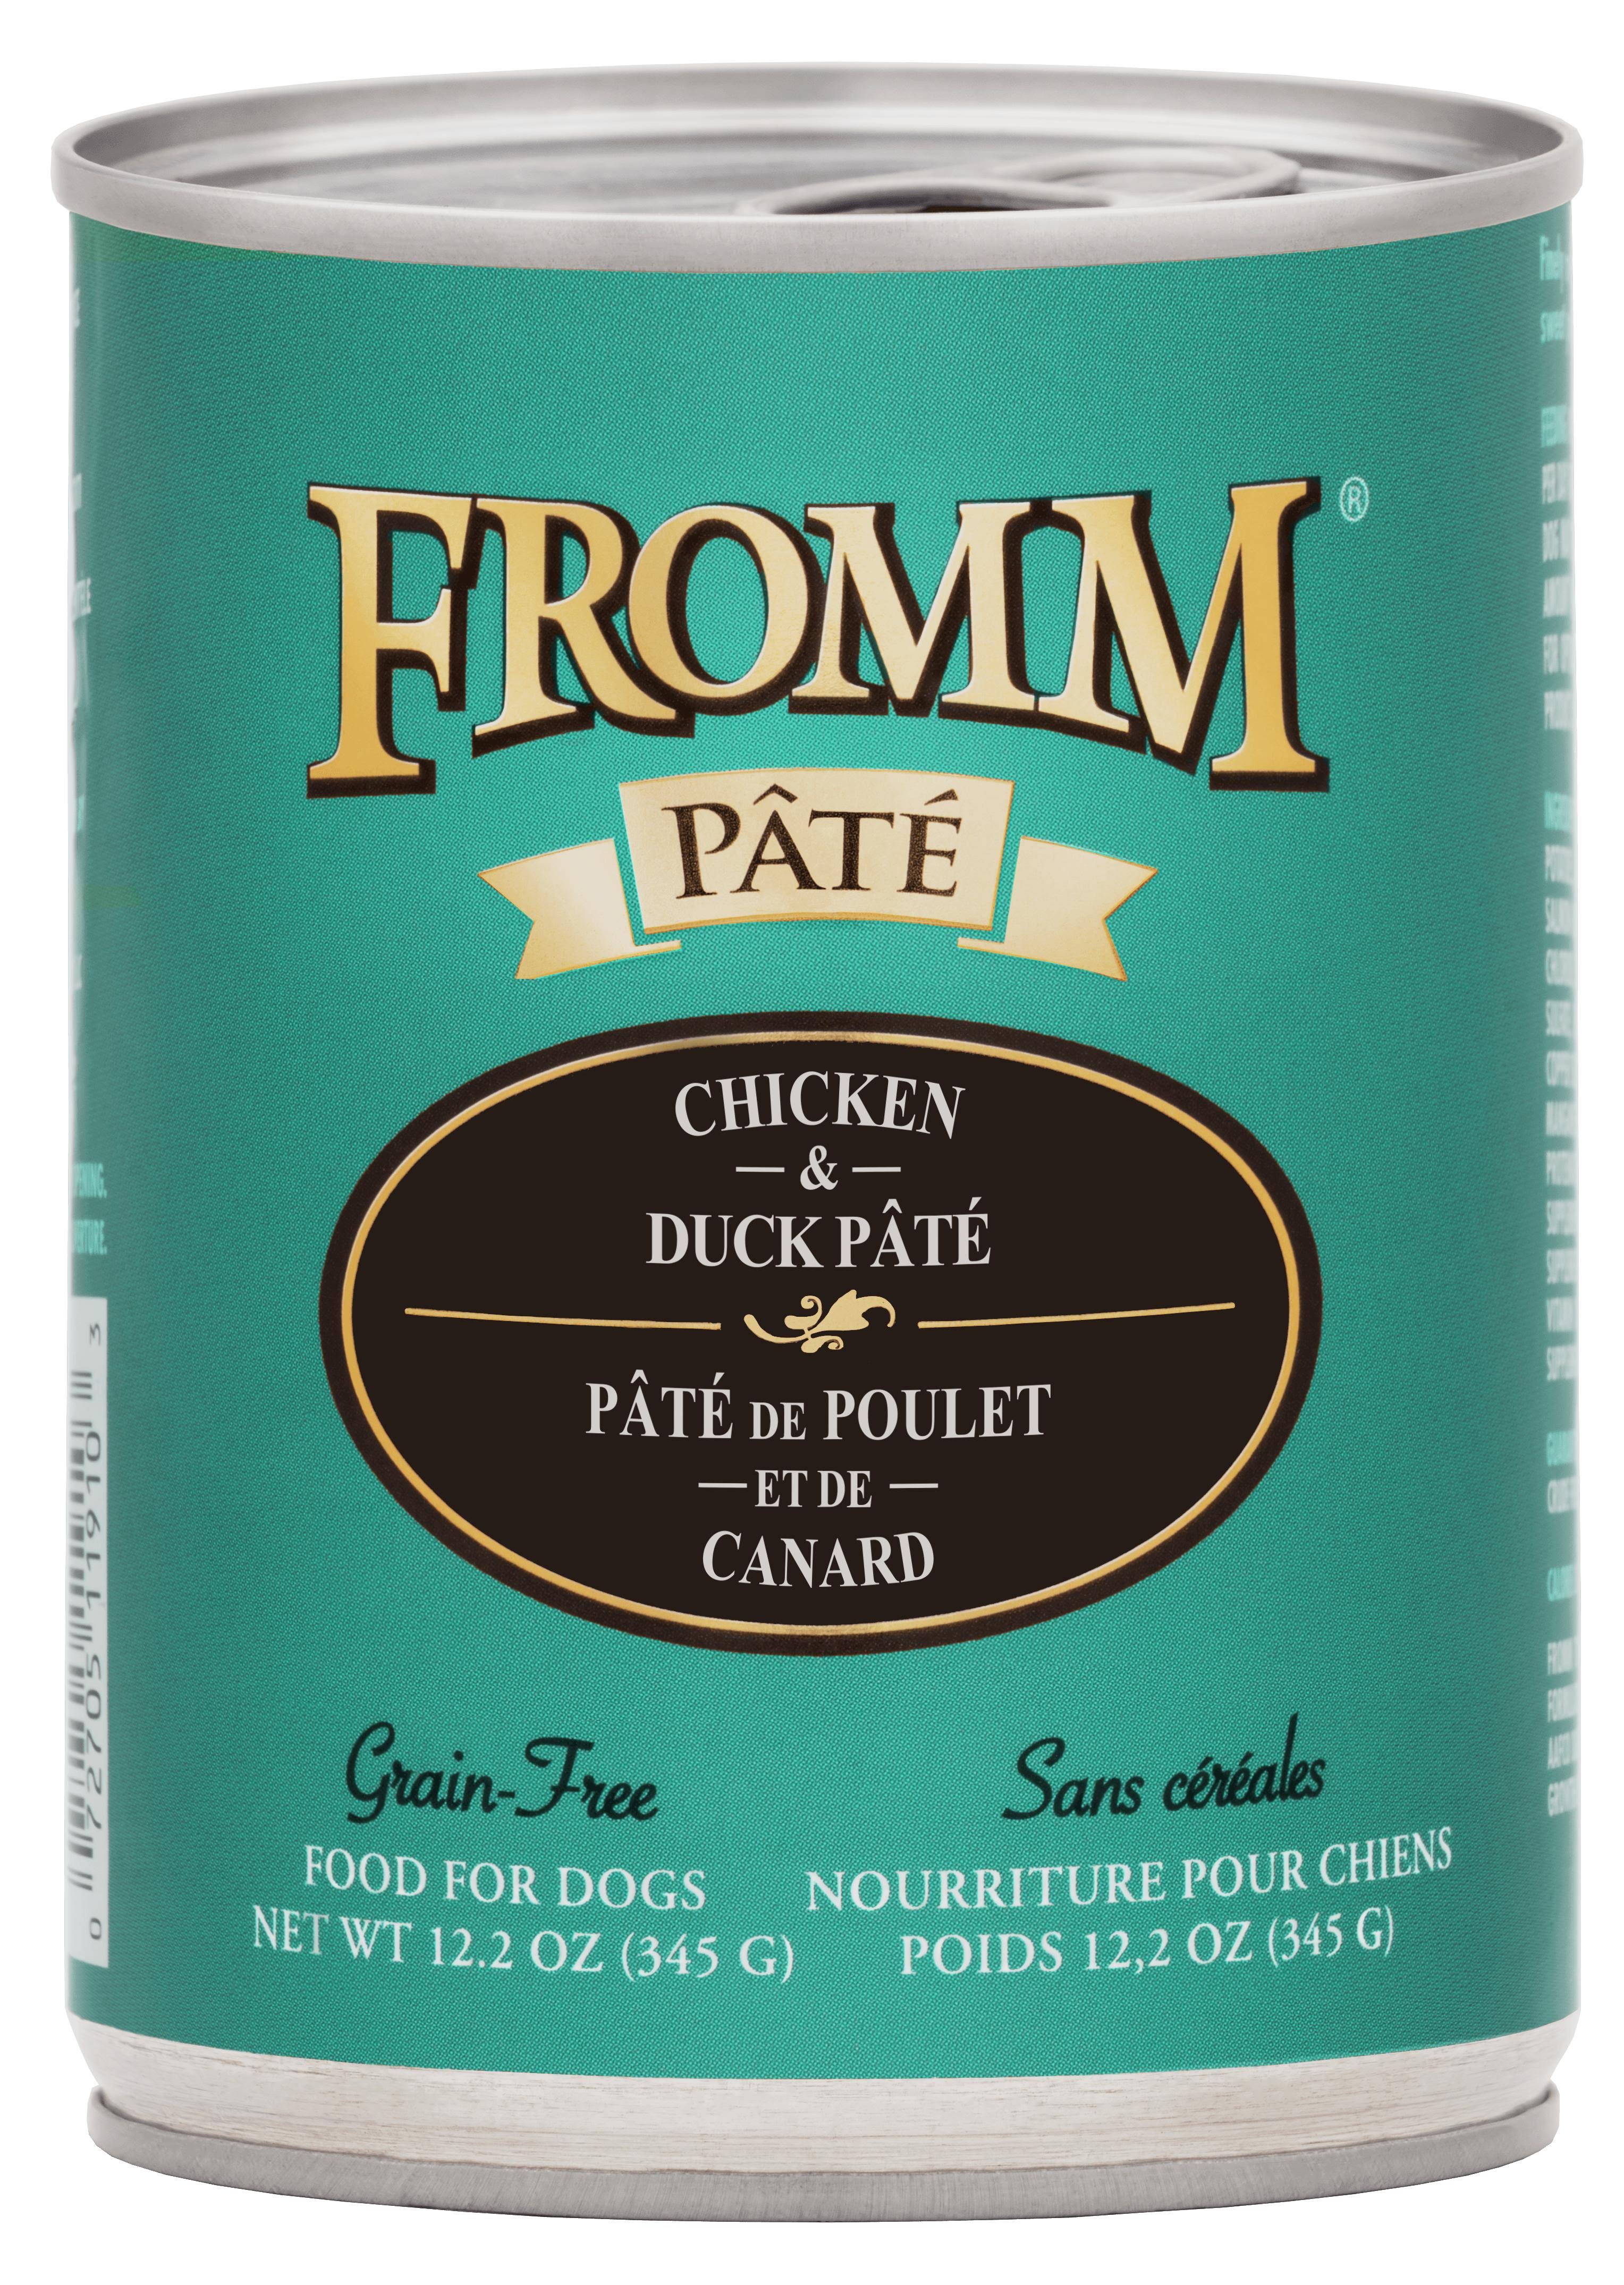 Fromm Gold Grain Free Chicken & Duck Pate Canned Dog Food - 12.2-oz, Case of 12